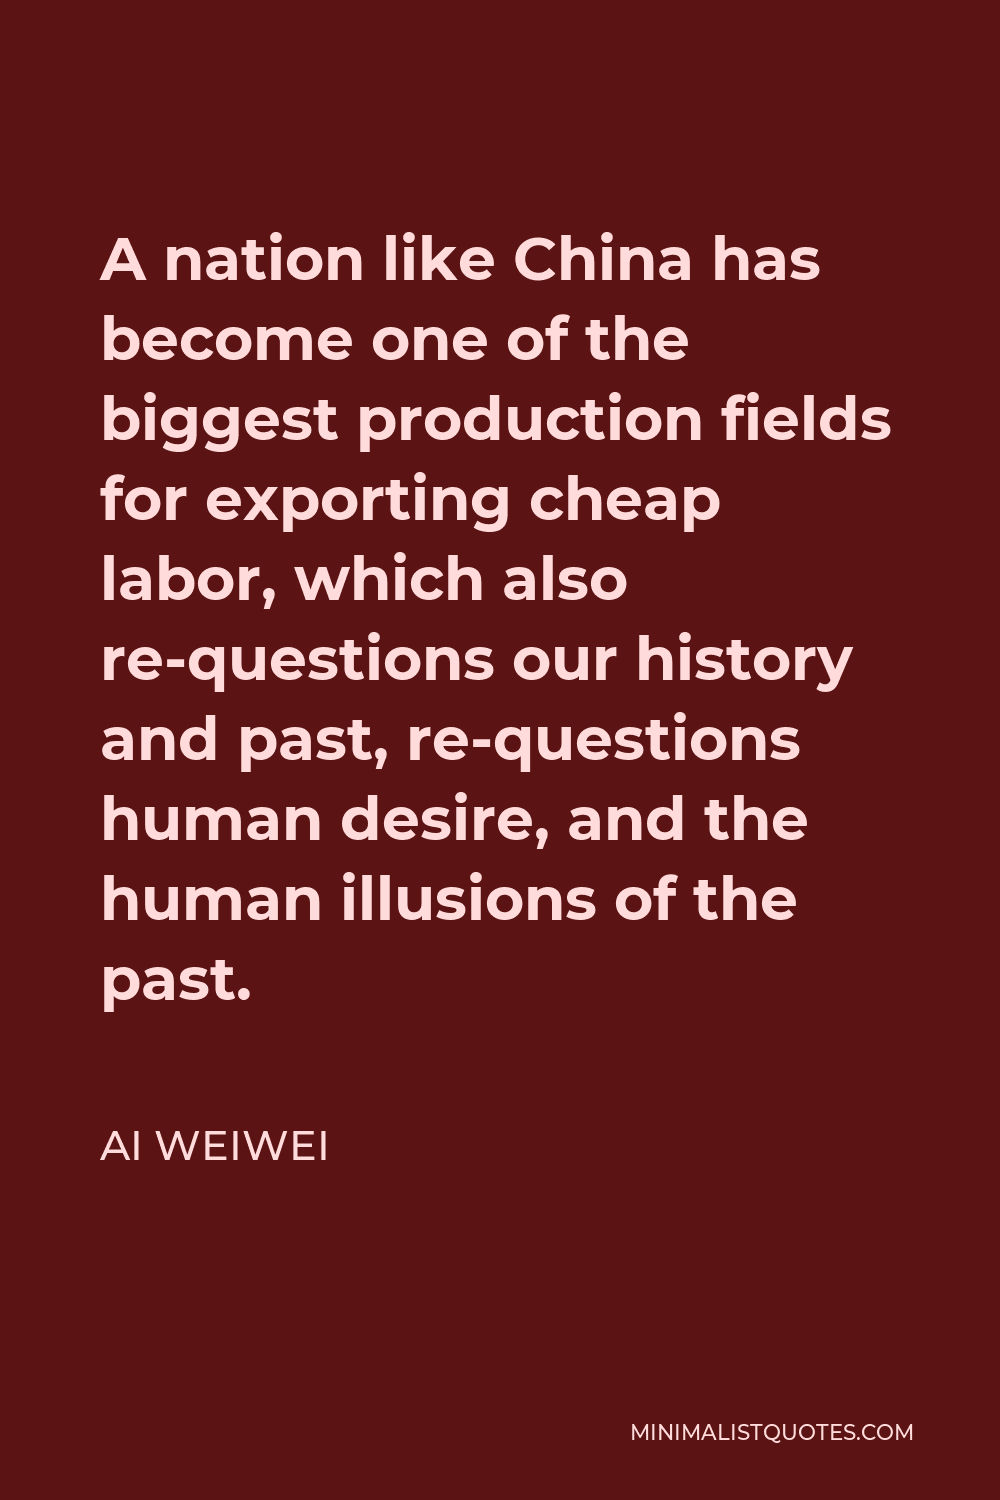 Ai Weiwei Quote - A nation like China has become one of the biggest production fields for exporting cheap labor, which also re-questions our history and past, re-questions human desire, and the human illusions of the past.